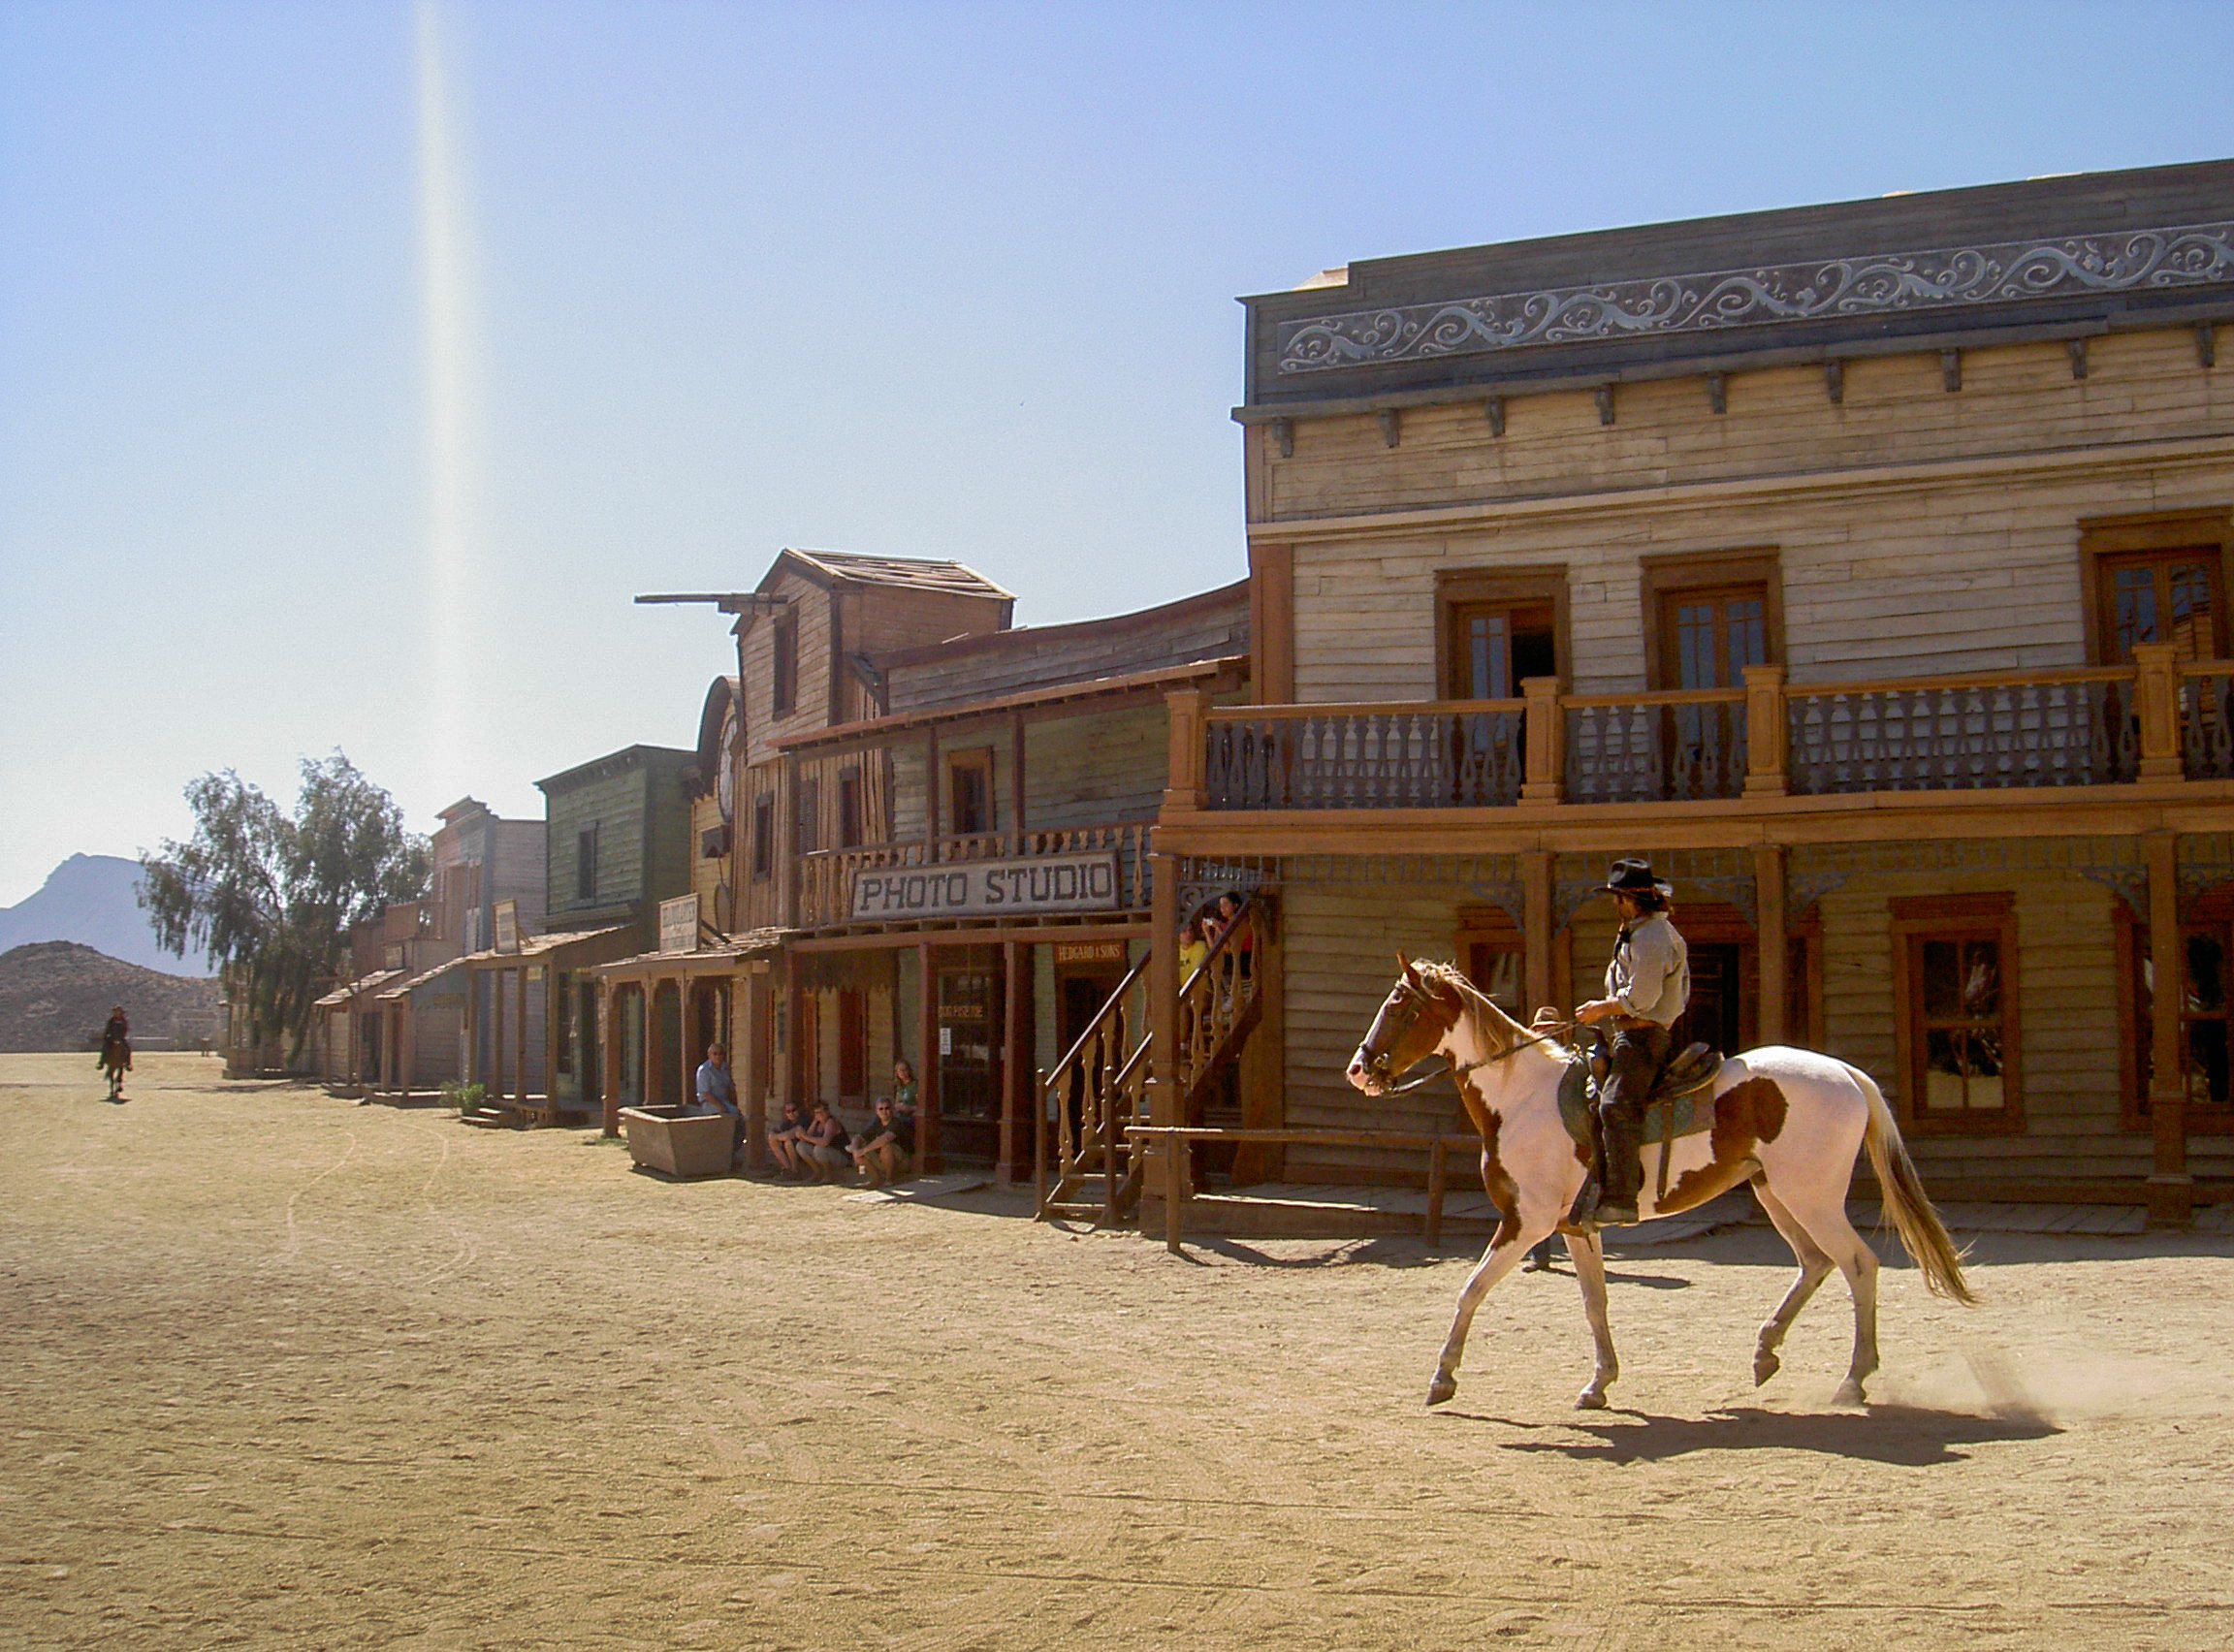 Photo of a person riding a horse in a Western-style town (a movie studio)) with historic buildings, including a photo studio.